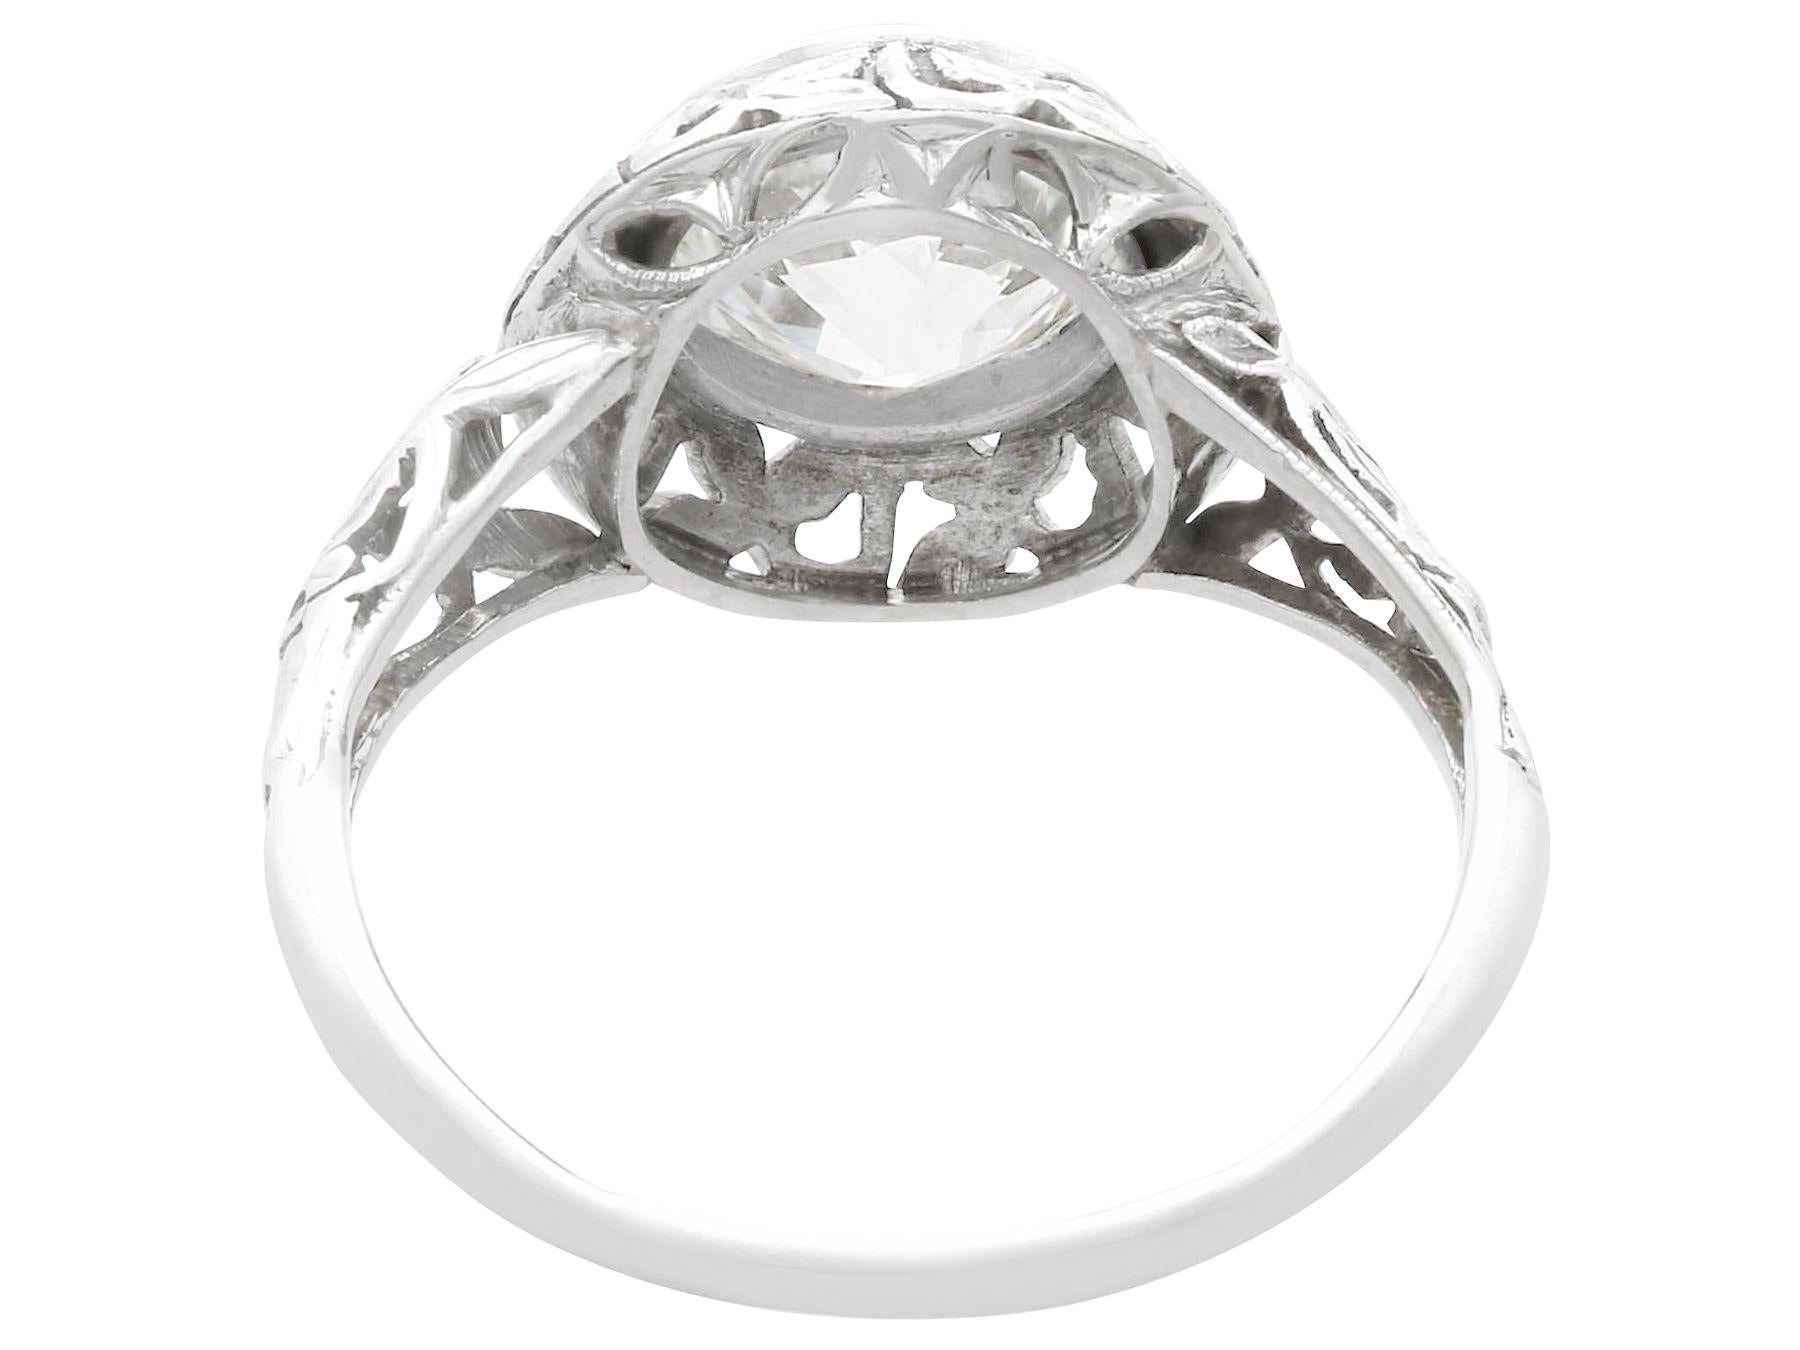 Women's 1.70 Carat Diamond and 18 K White Gold Solitaire Ring, Antique circa 1910